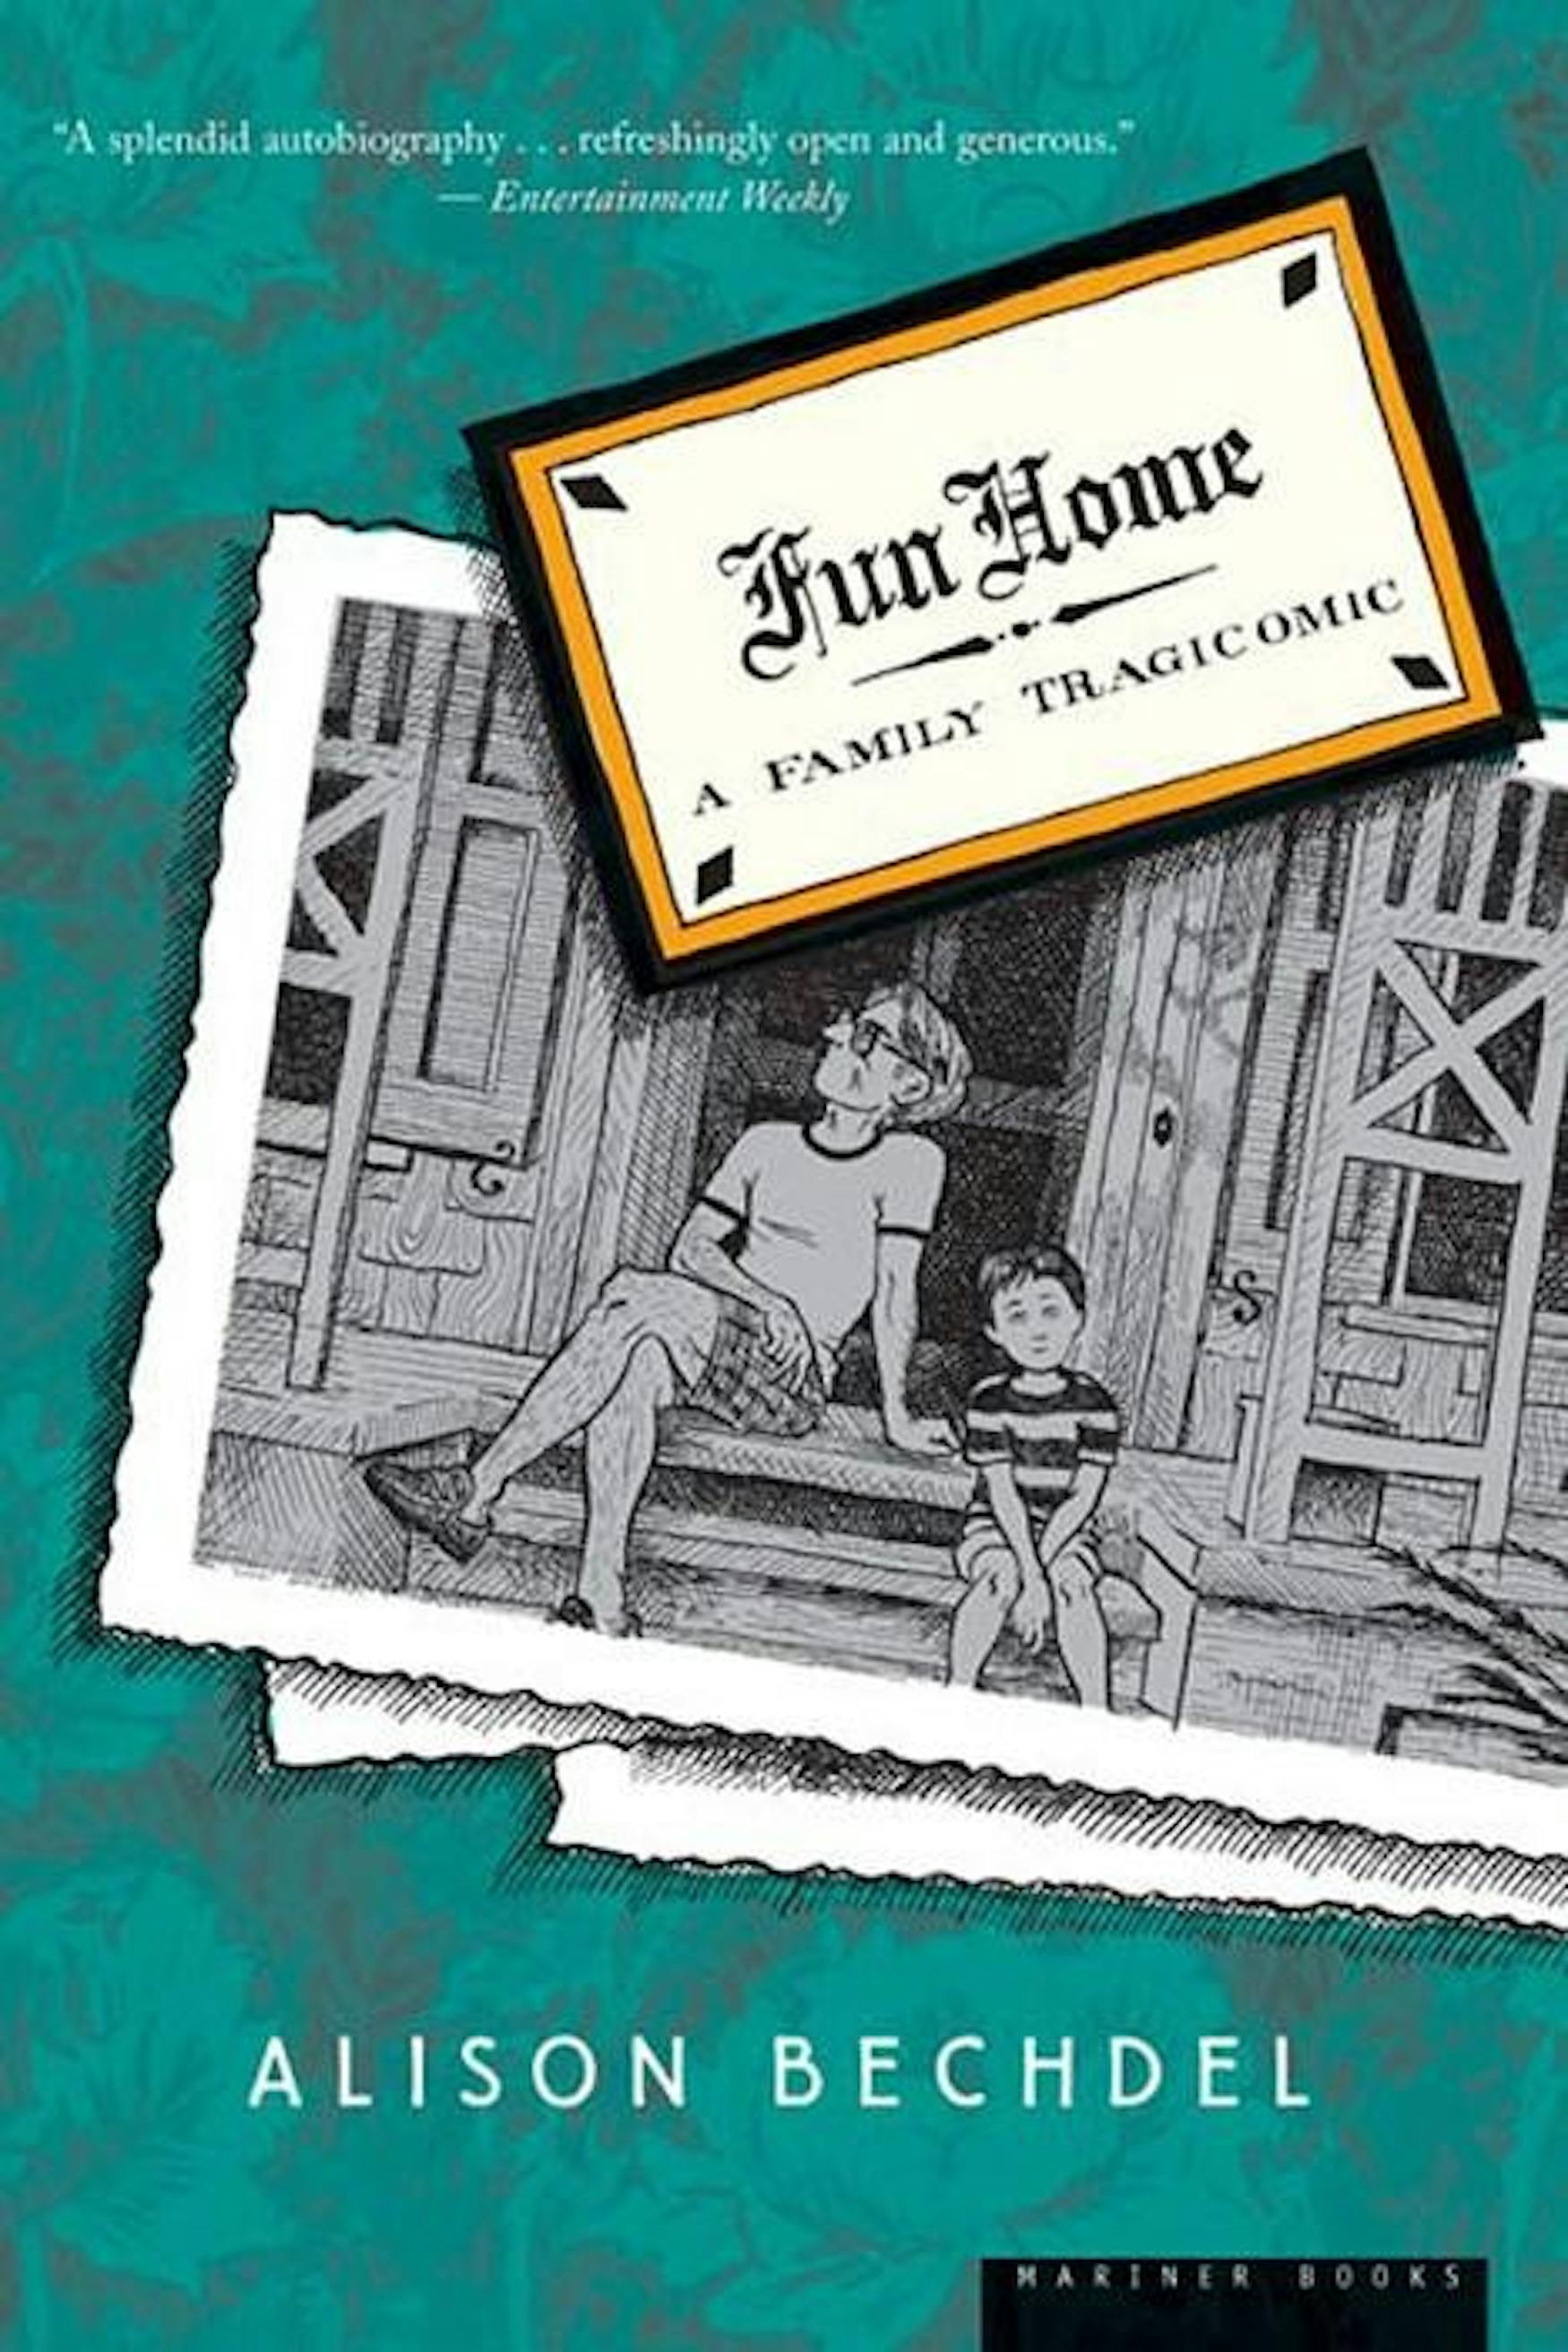 A STORY IN CAPTIONS: Adapted from Alison Bechdel's graphic novel of the same name, Fun Home tells the story of the author's childhood--focusing on her sexual awakening and her mixed relationship with her father.